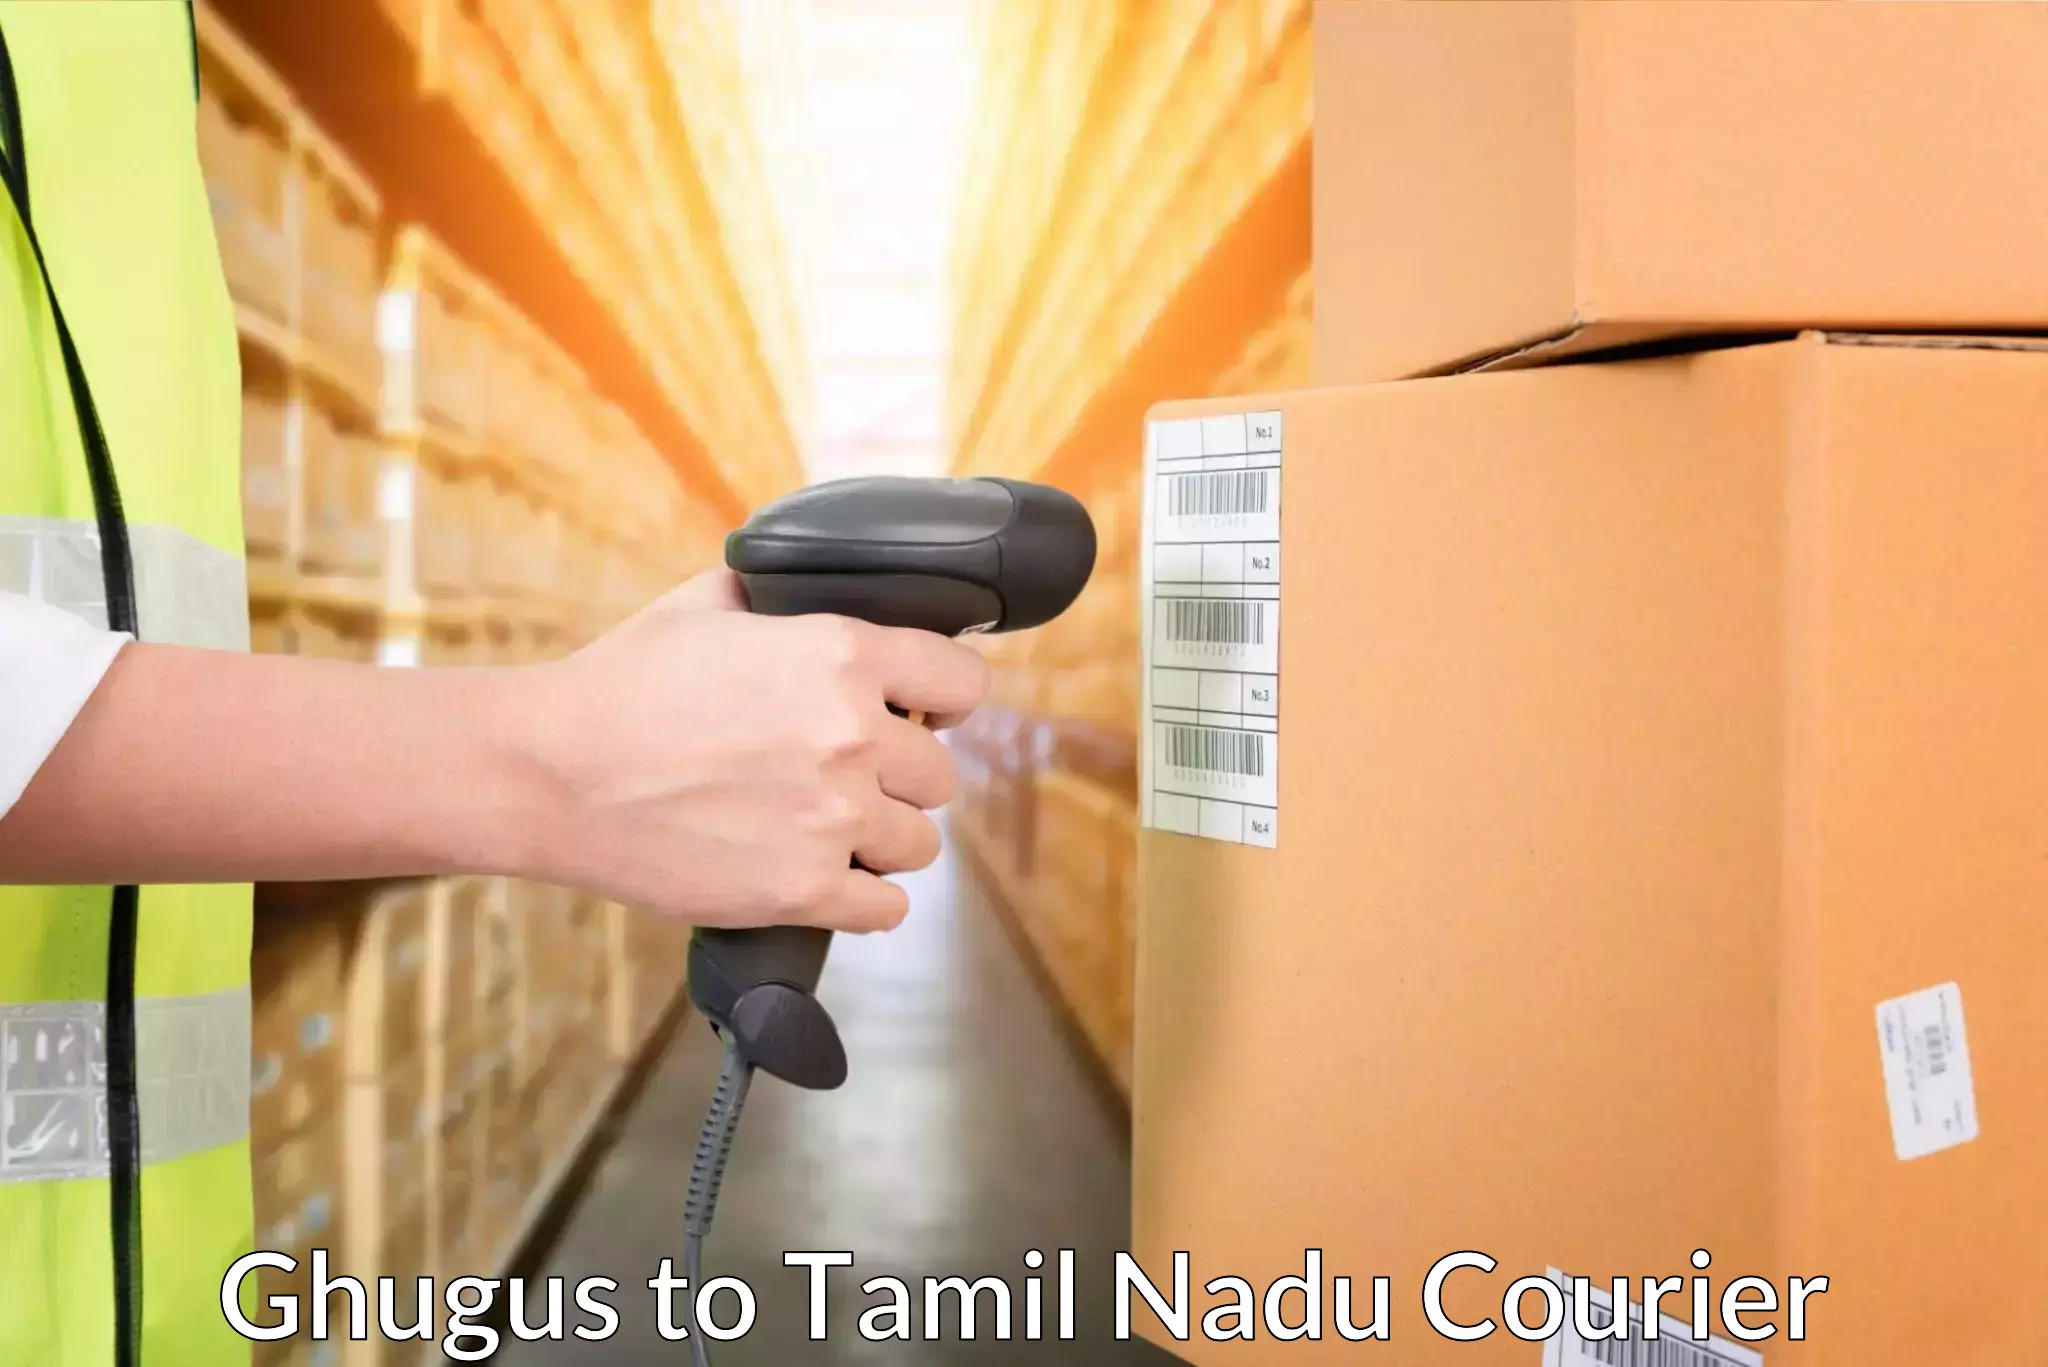 Quality courier services Ghugus to Tamil Nadu